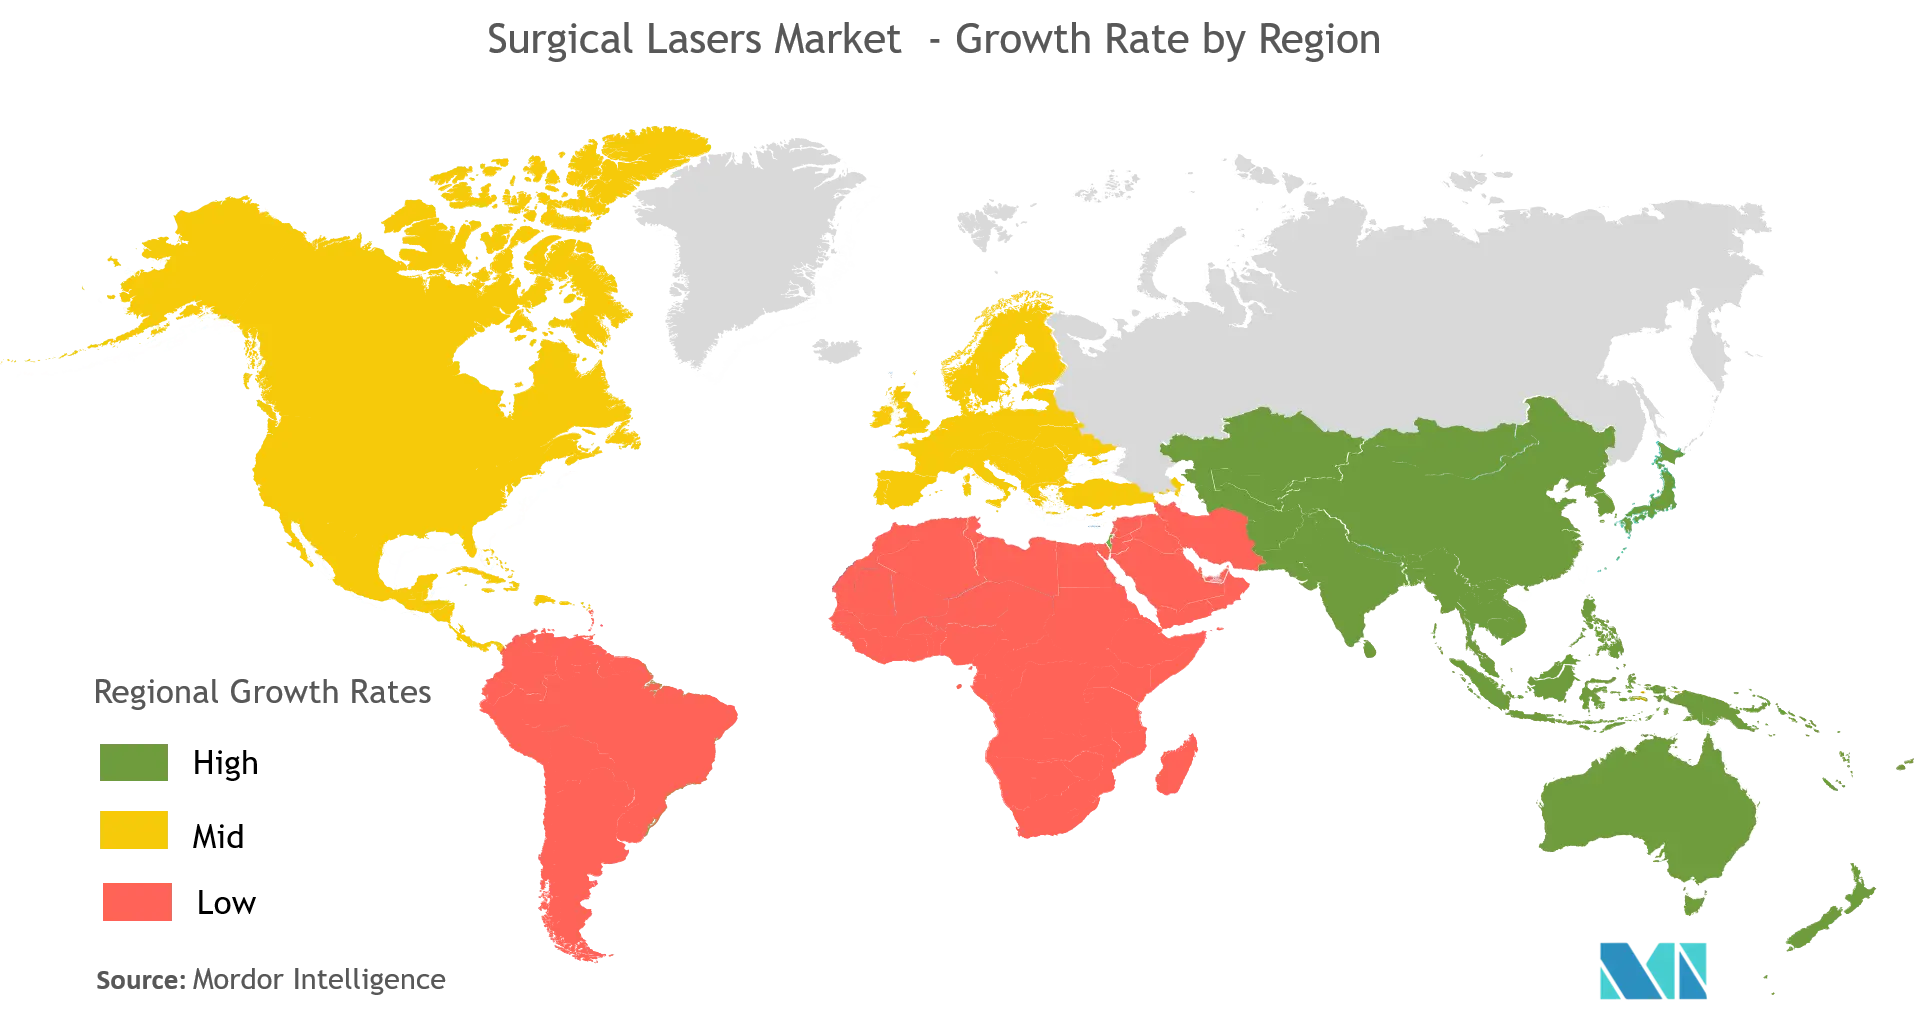 surgical lasers market size